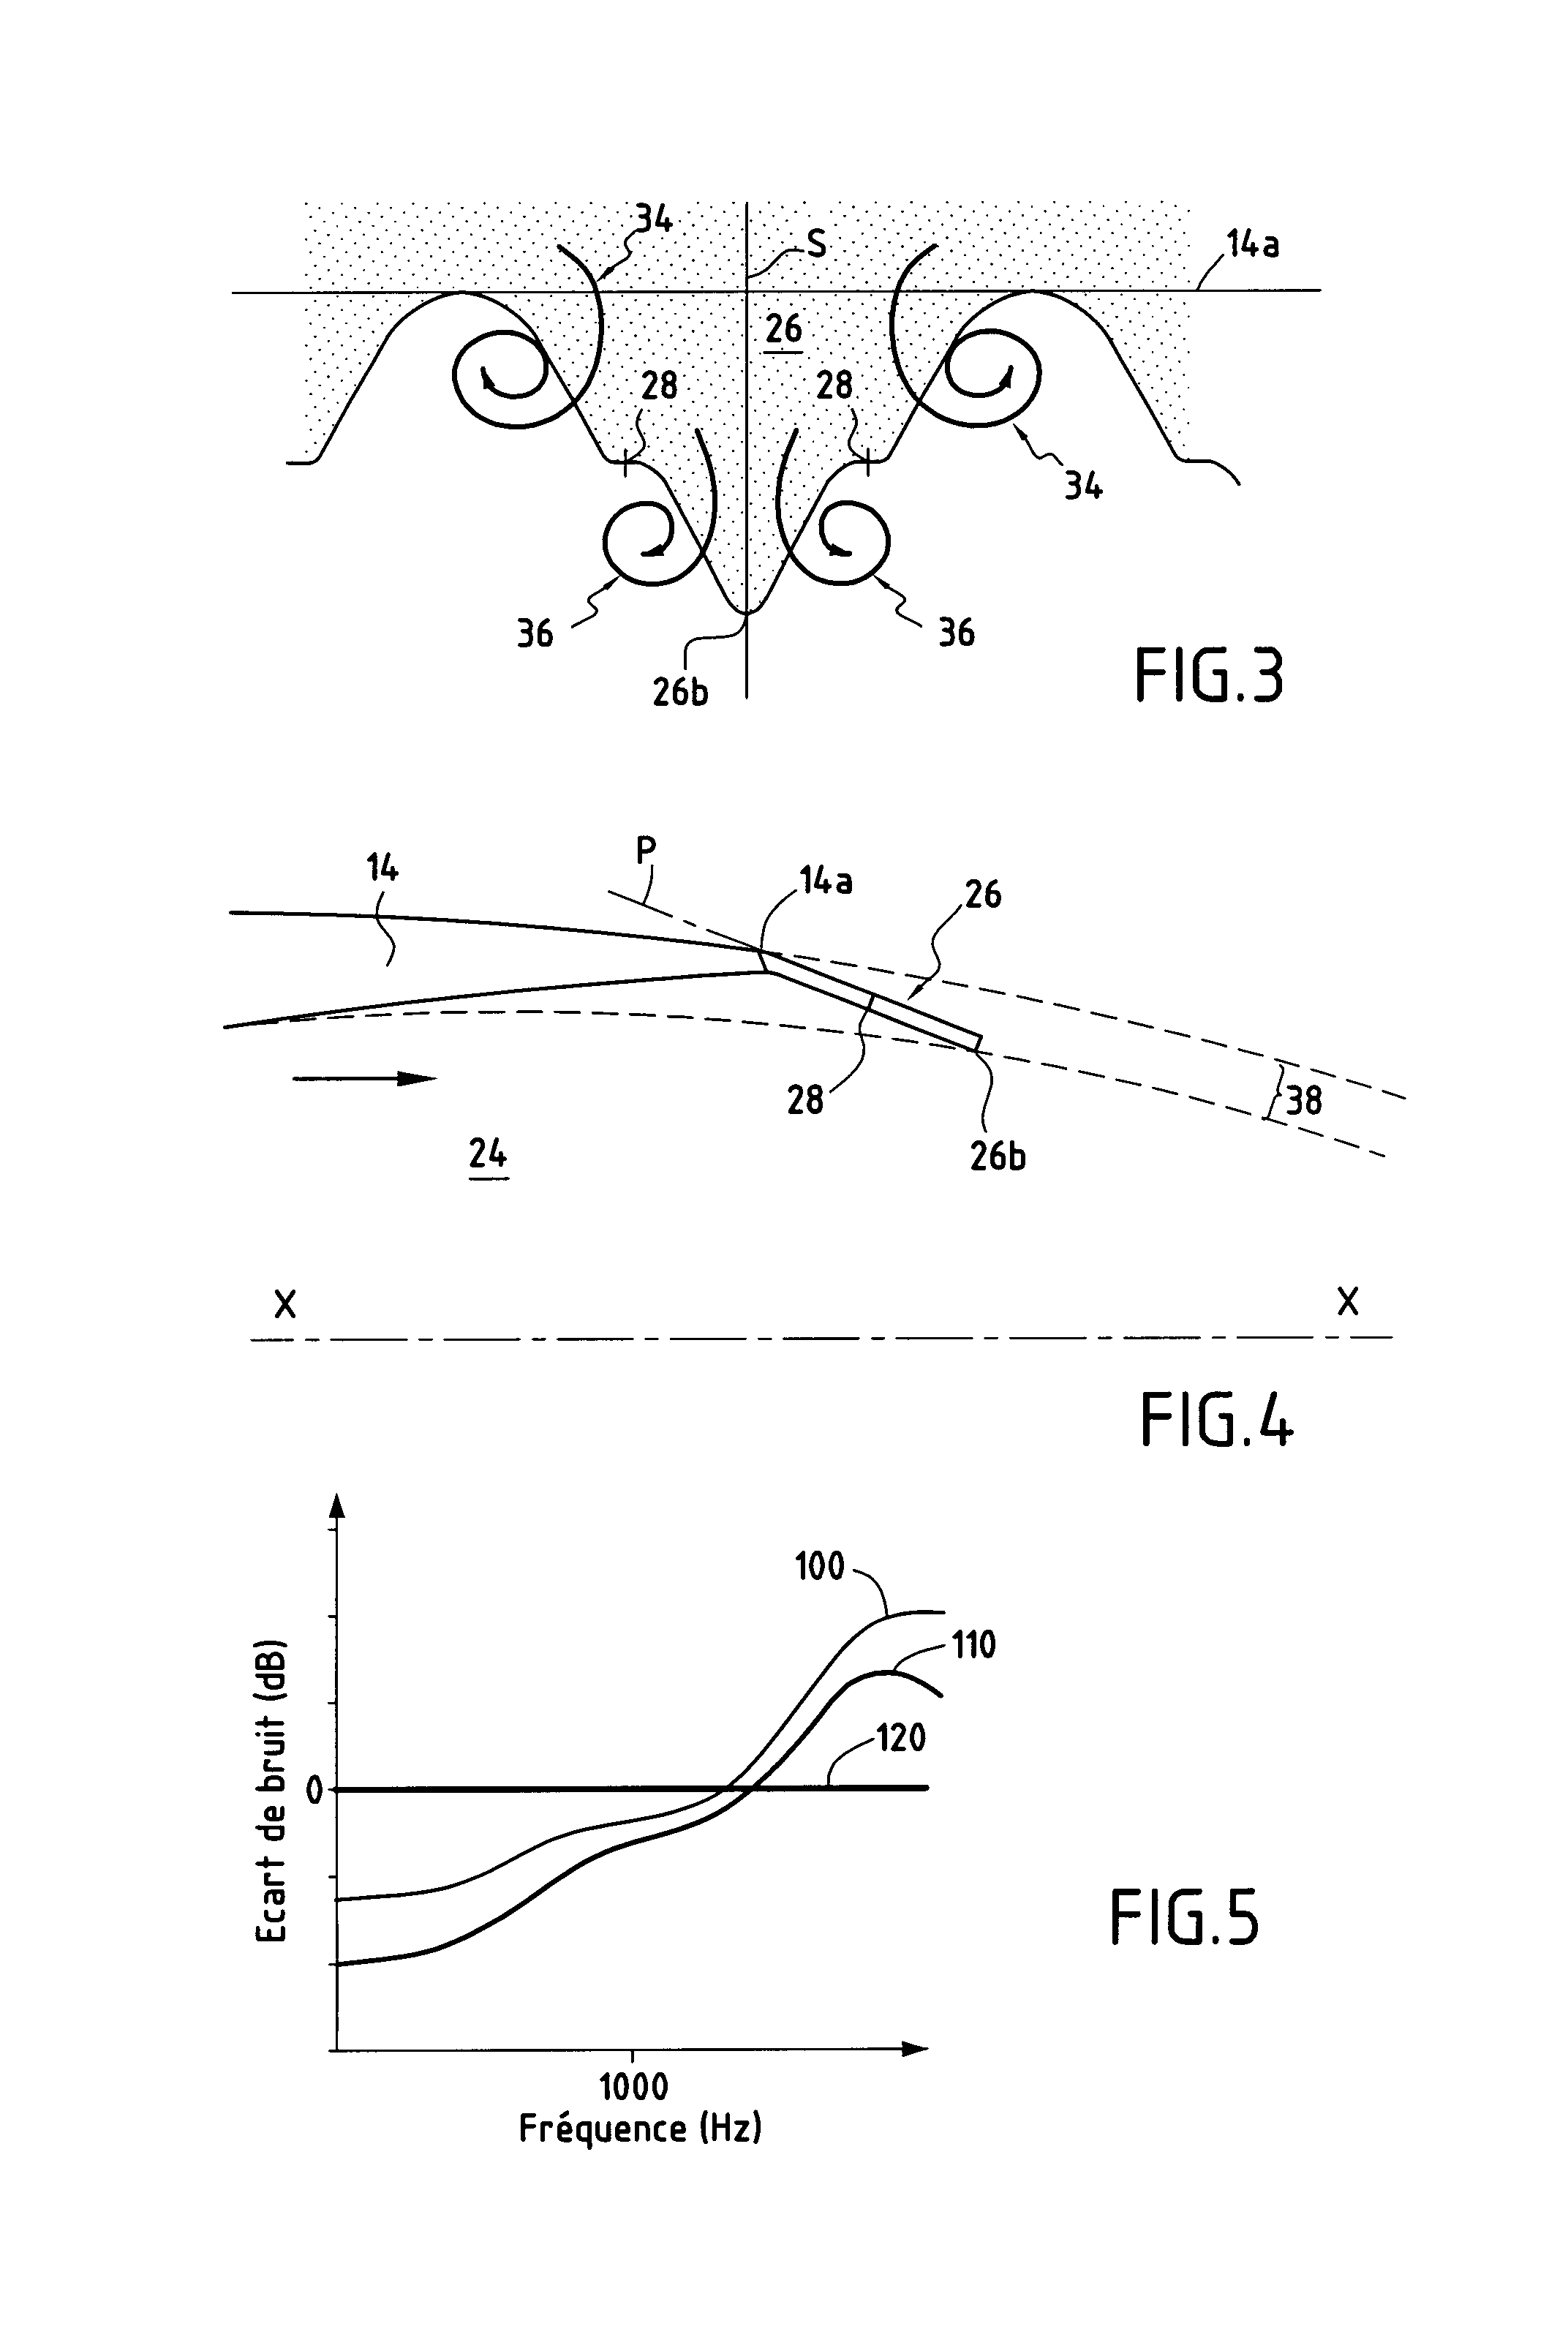 Turbomachine nozzle cover provided with triangular patterns having a point of inflexion for reducing jet noise